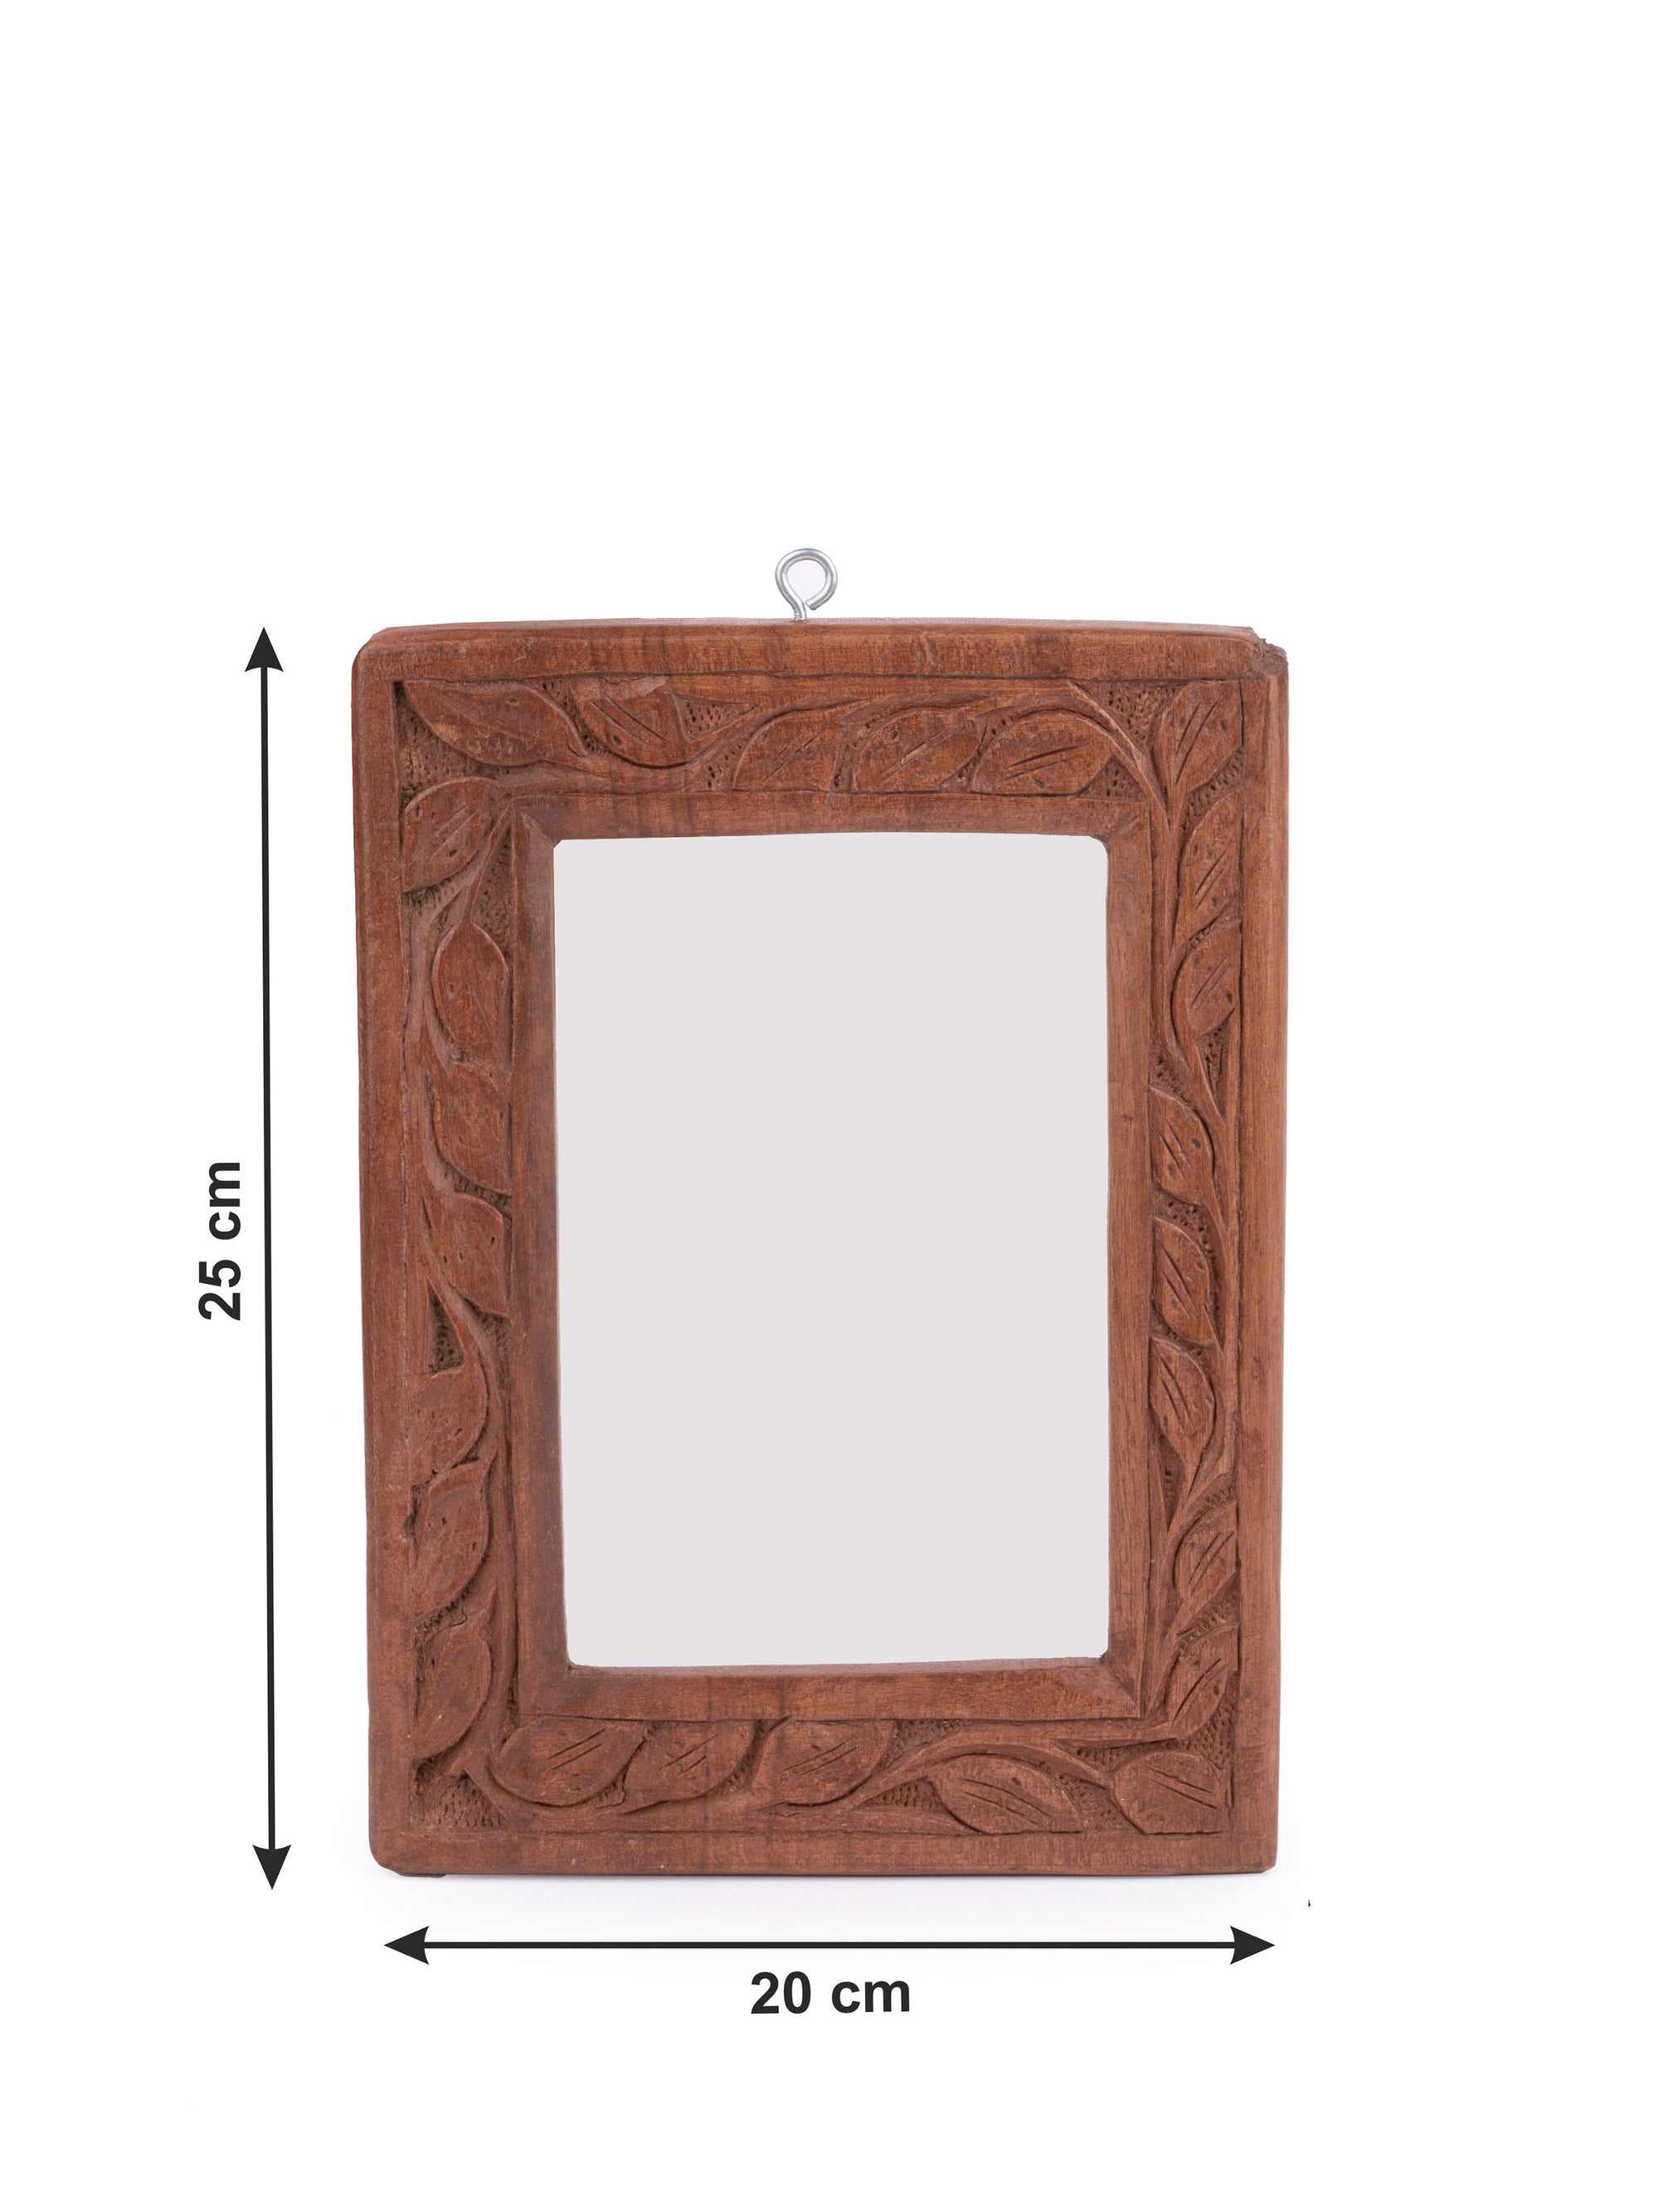 Wall hanging Photo Frame carved out of Walnut wood - 6x8 inches - The Heritage Artifacts